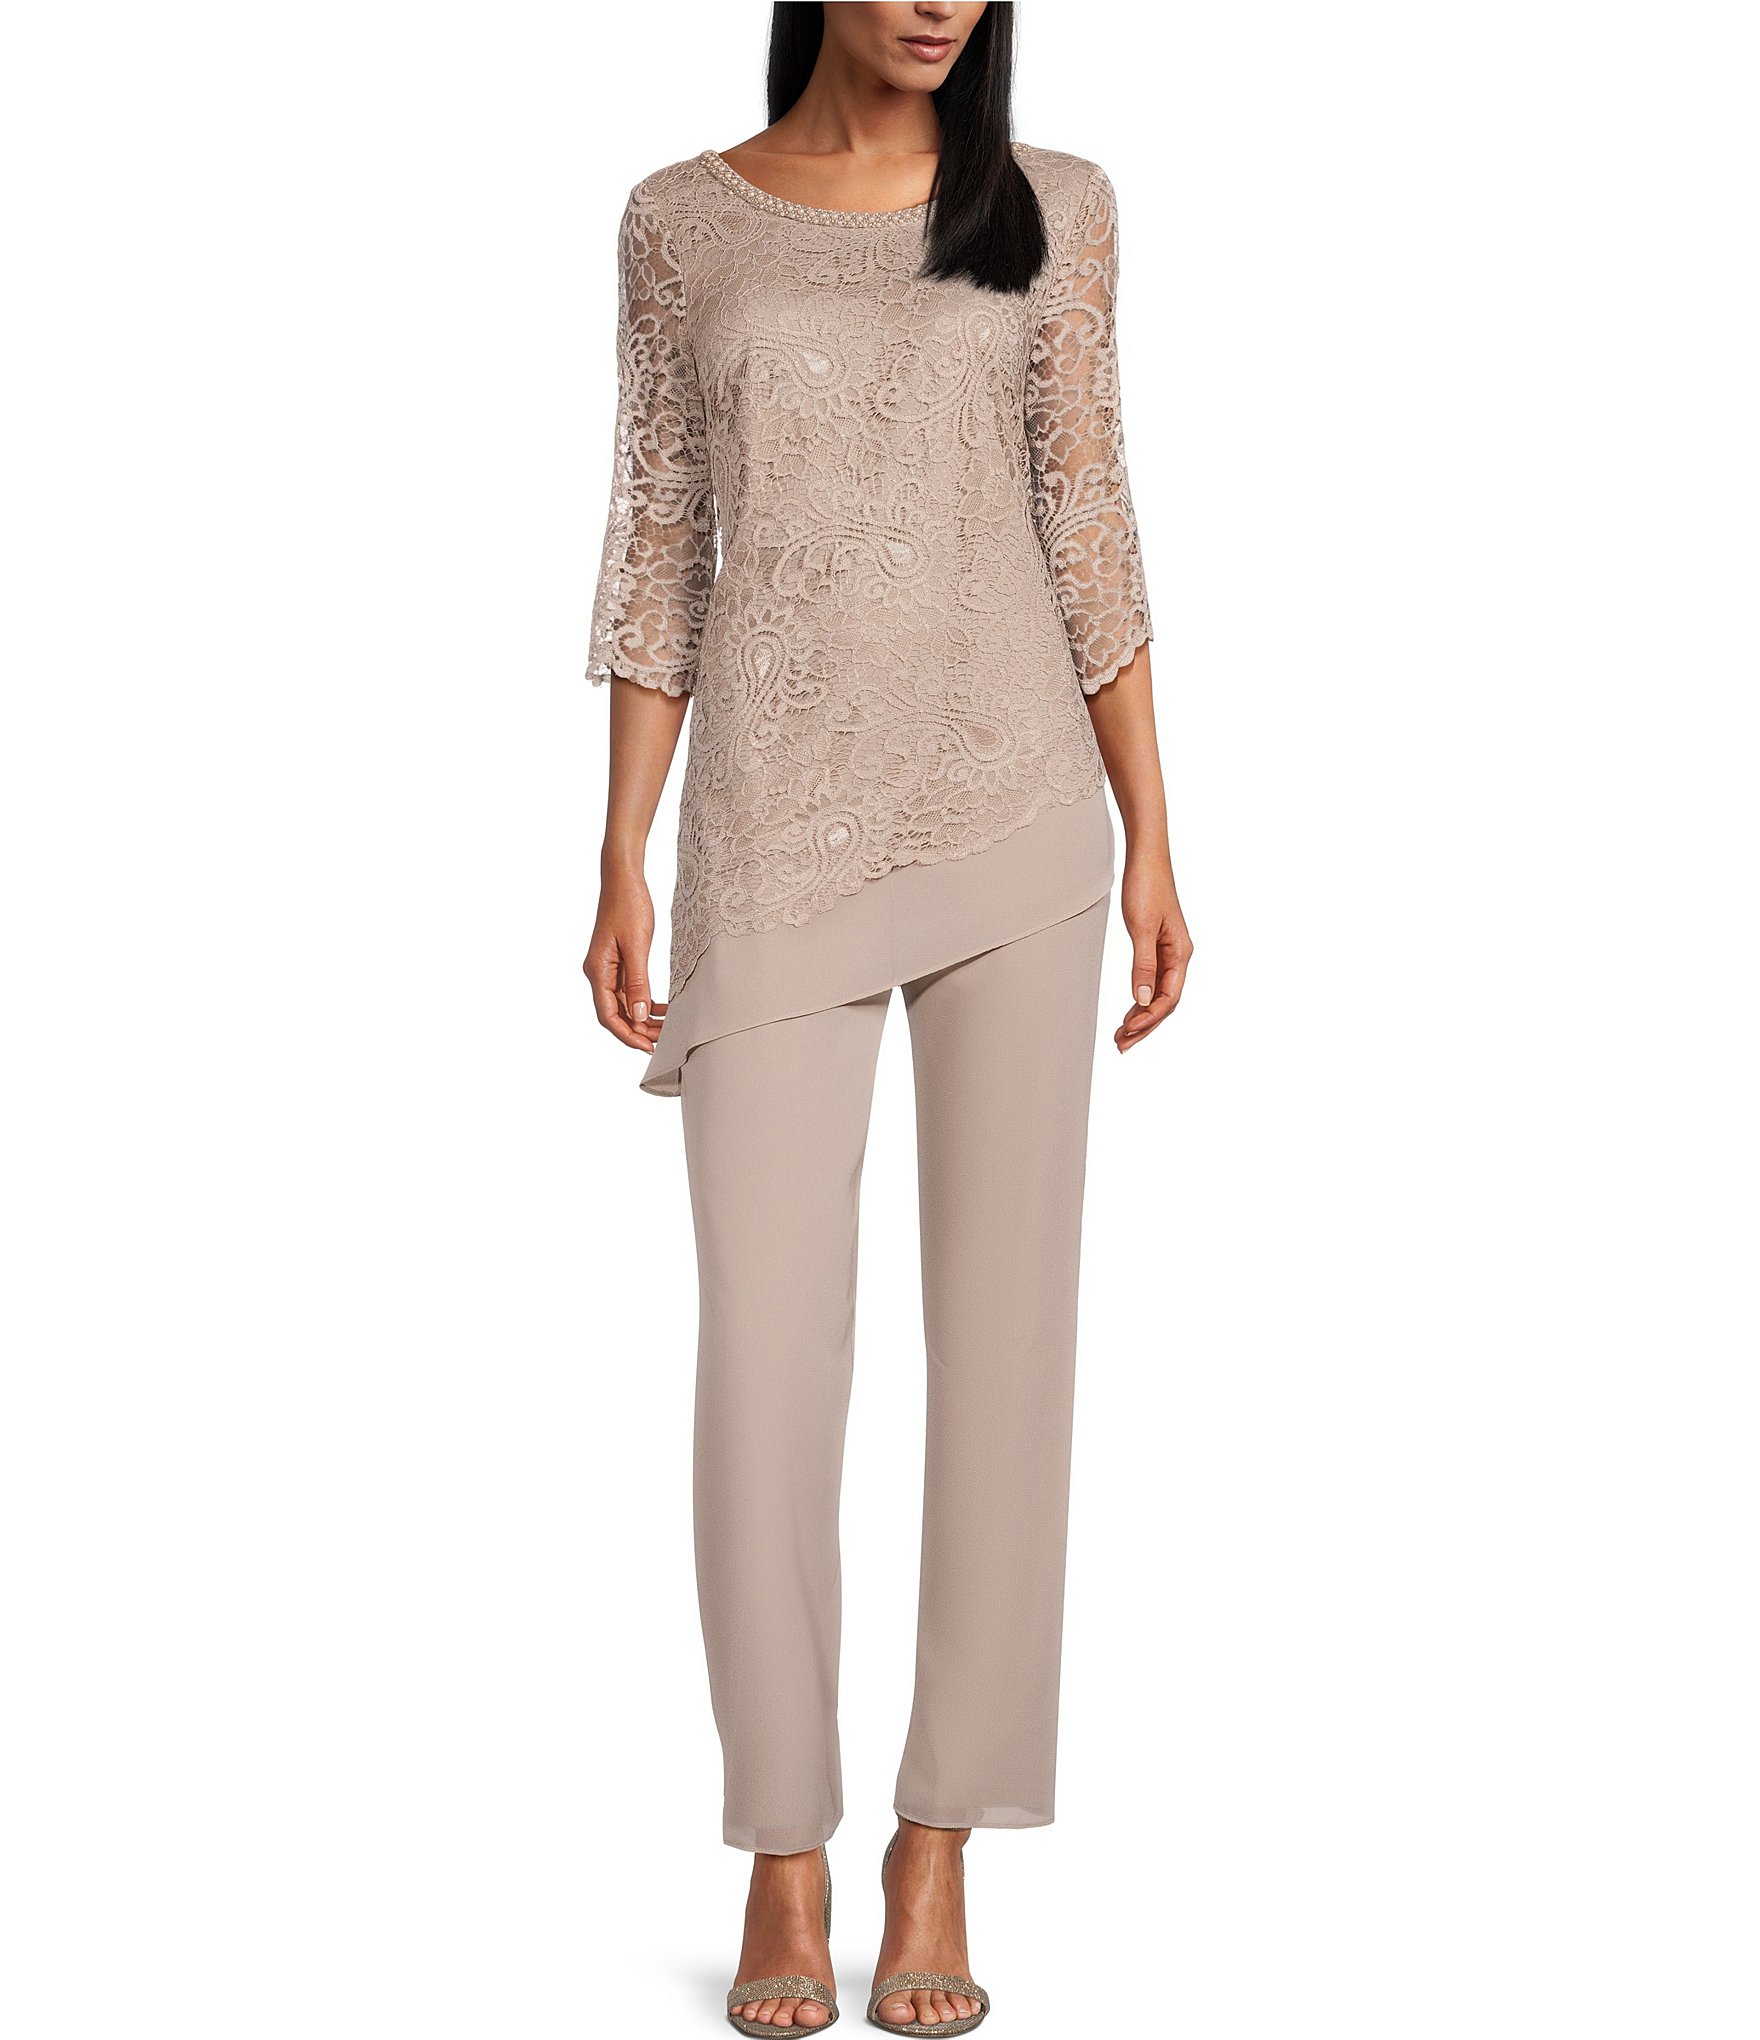 Embellished Top and Chiffon Coat Trouser Suit. 29519 - Catherines